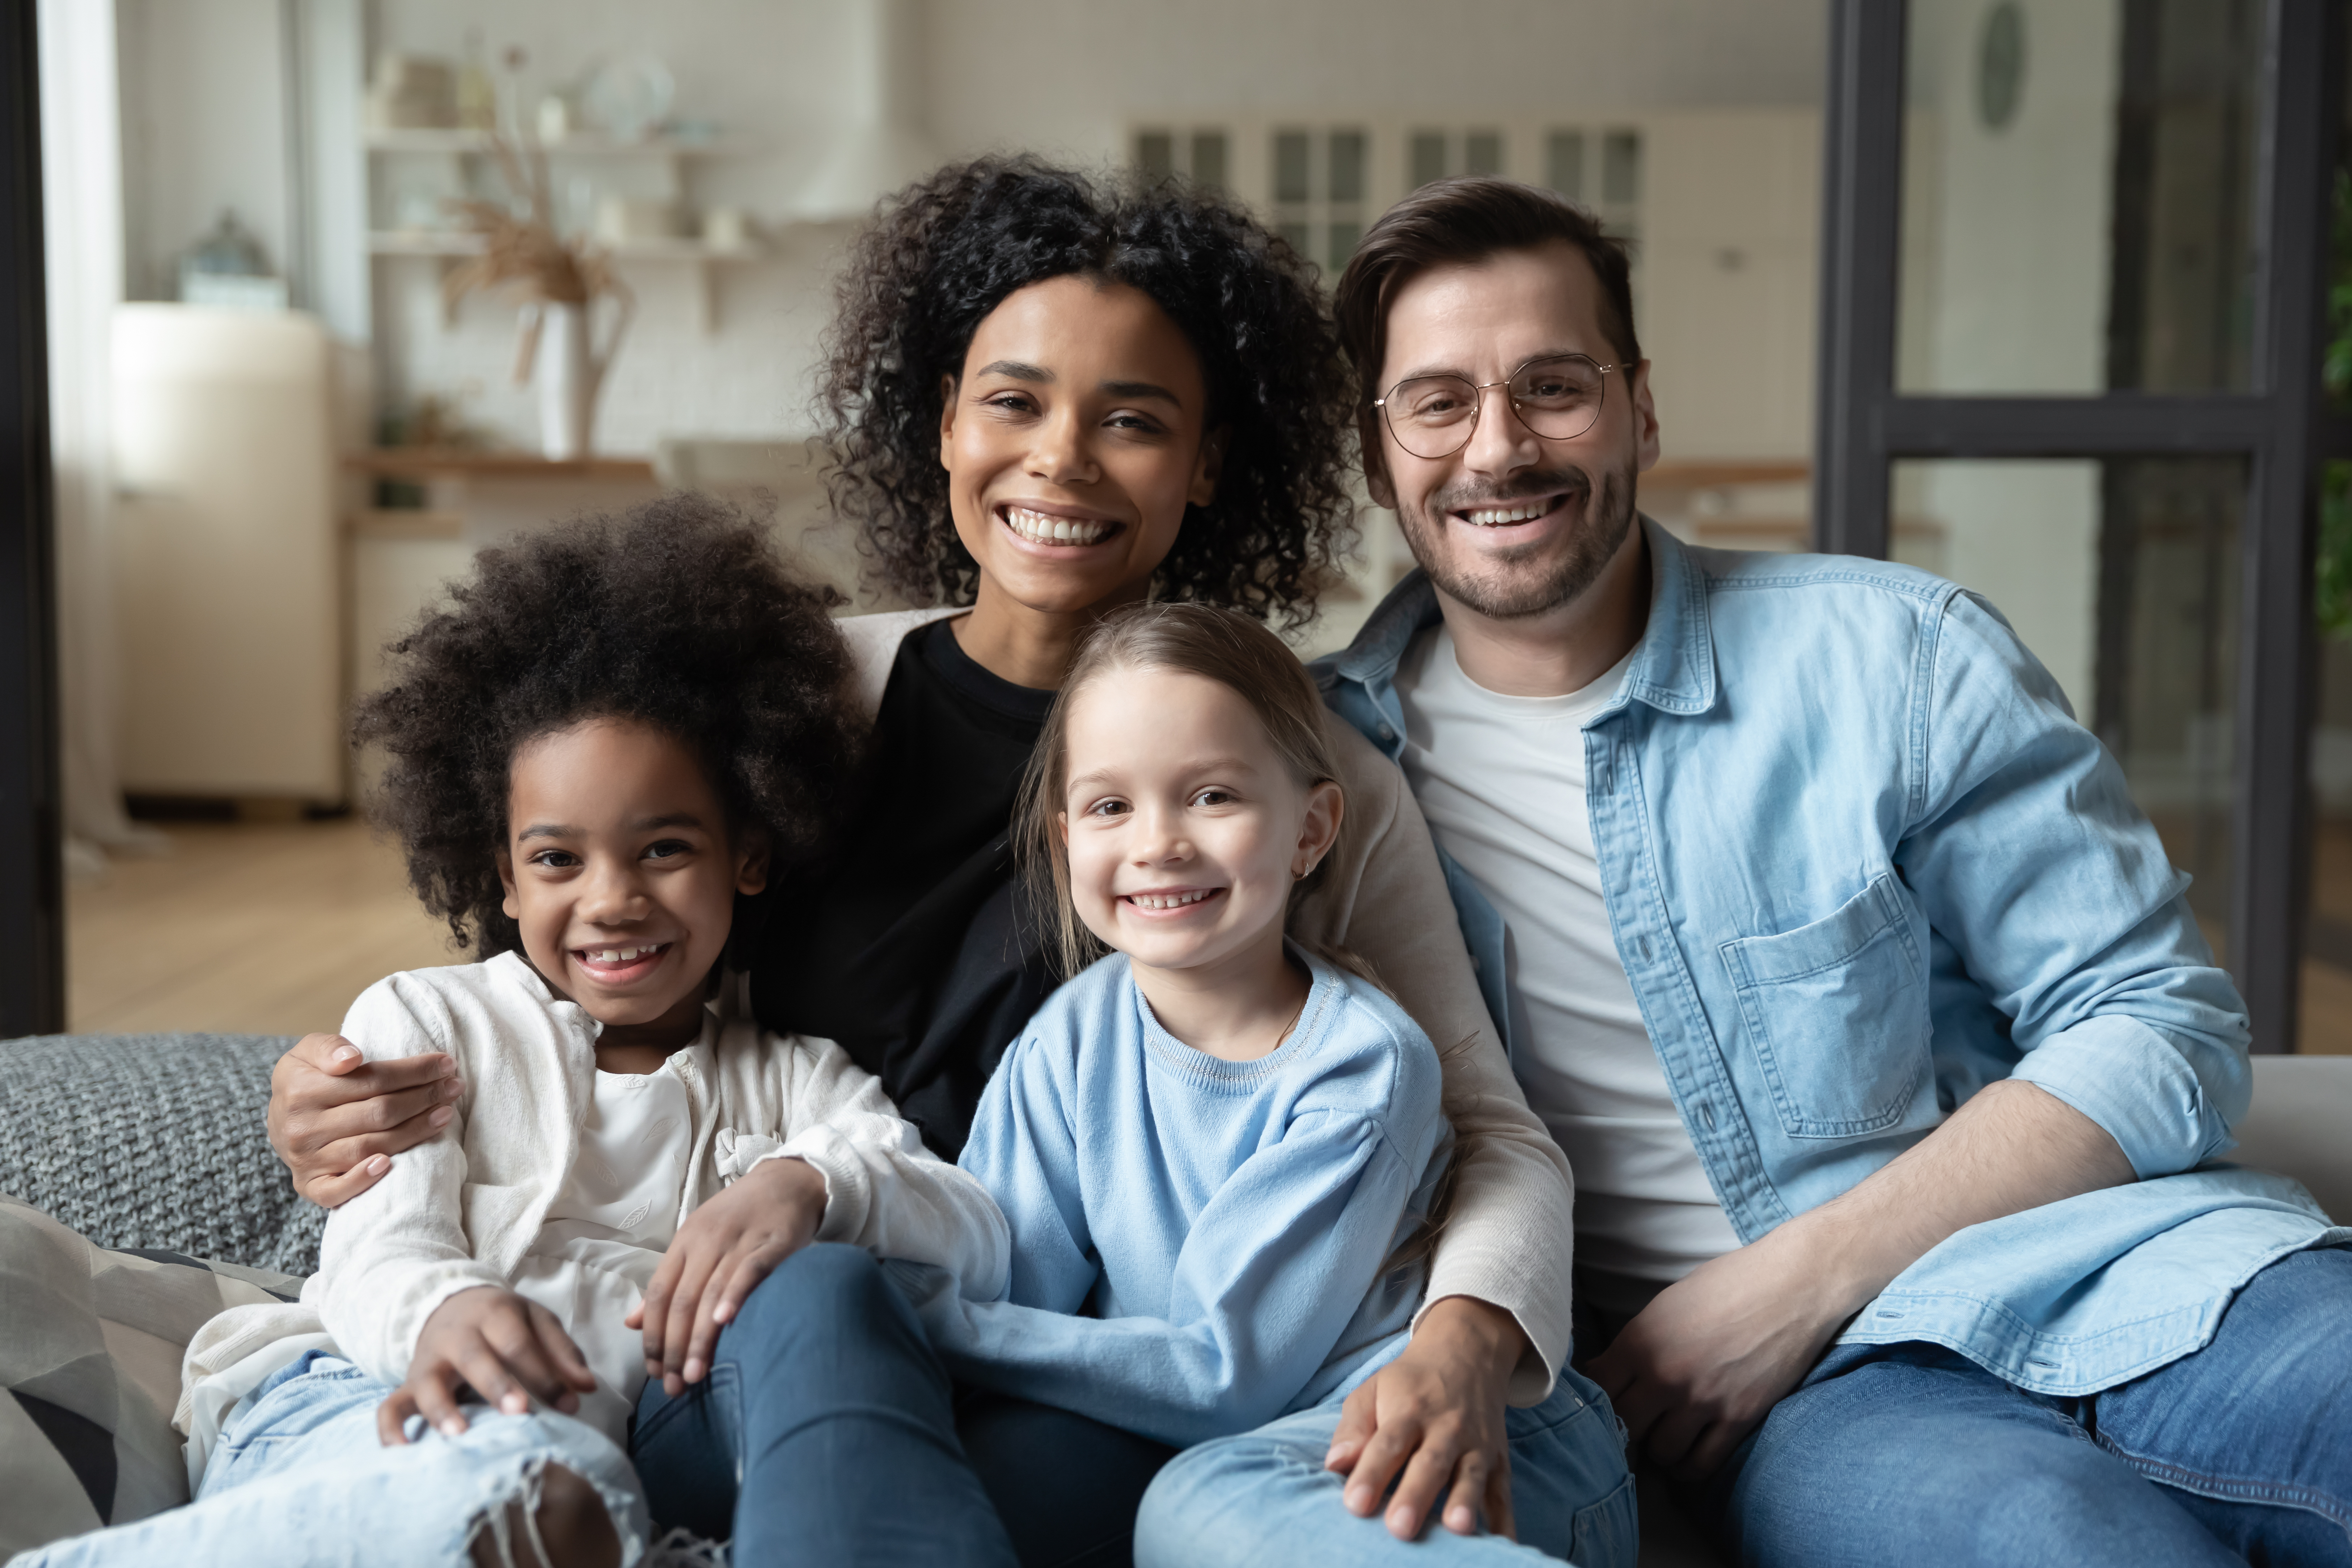 A multiracial couple smiling while sitting on a couch with their daughters | Source: Shutterstock